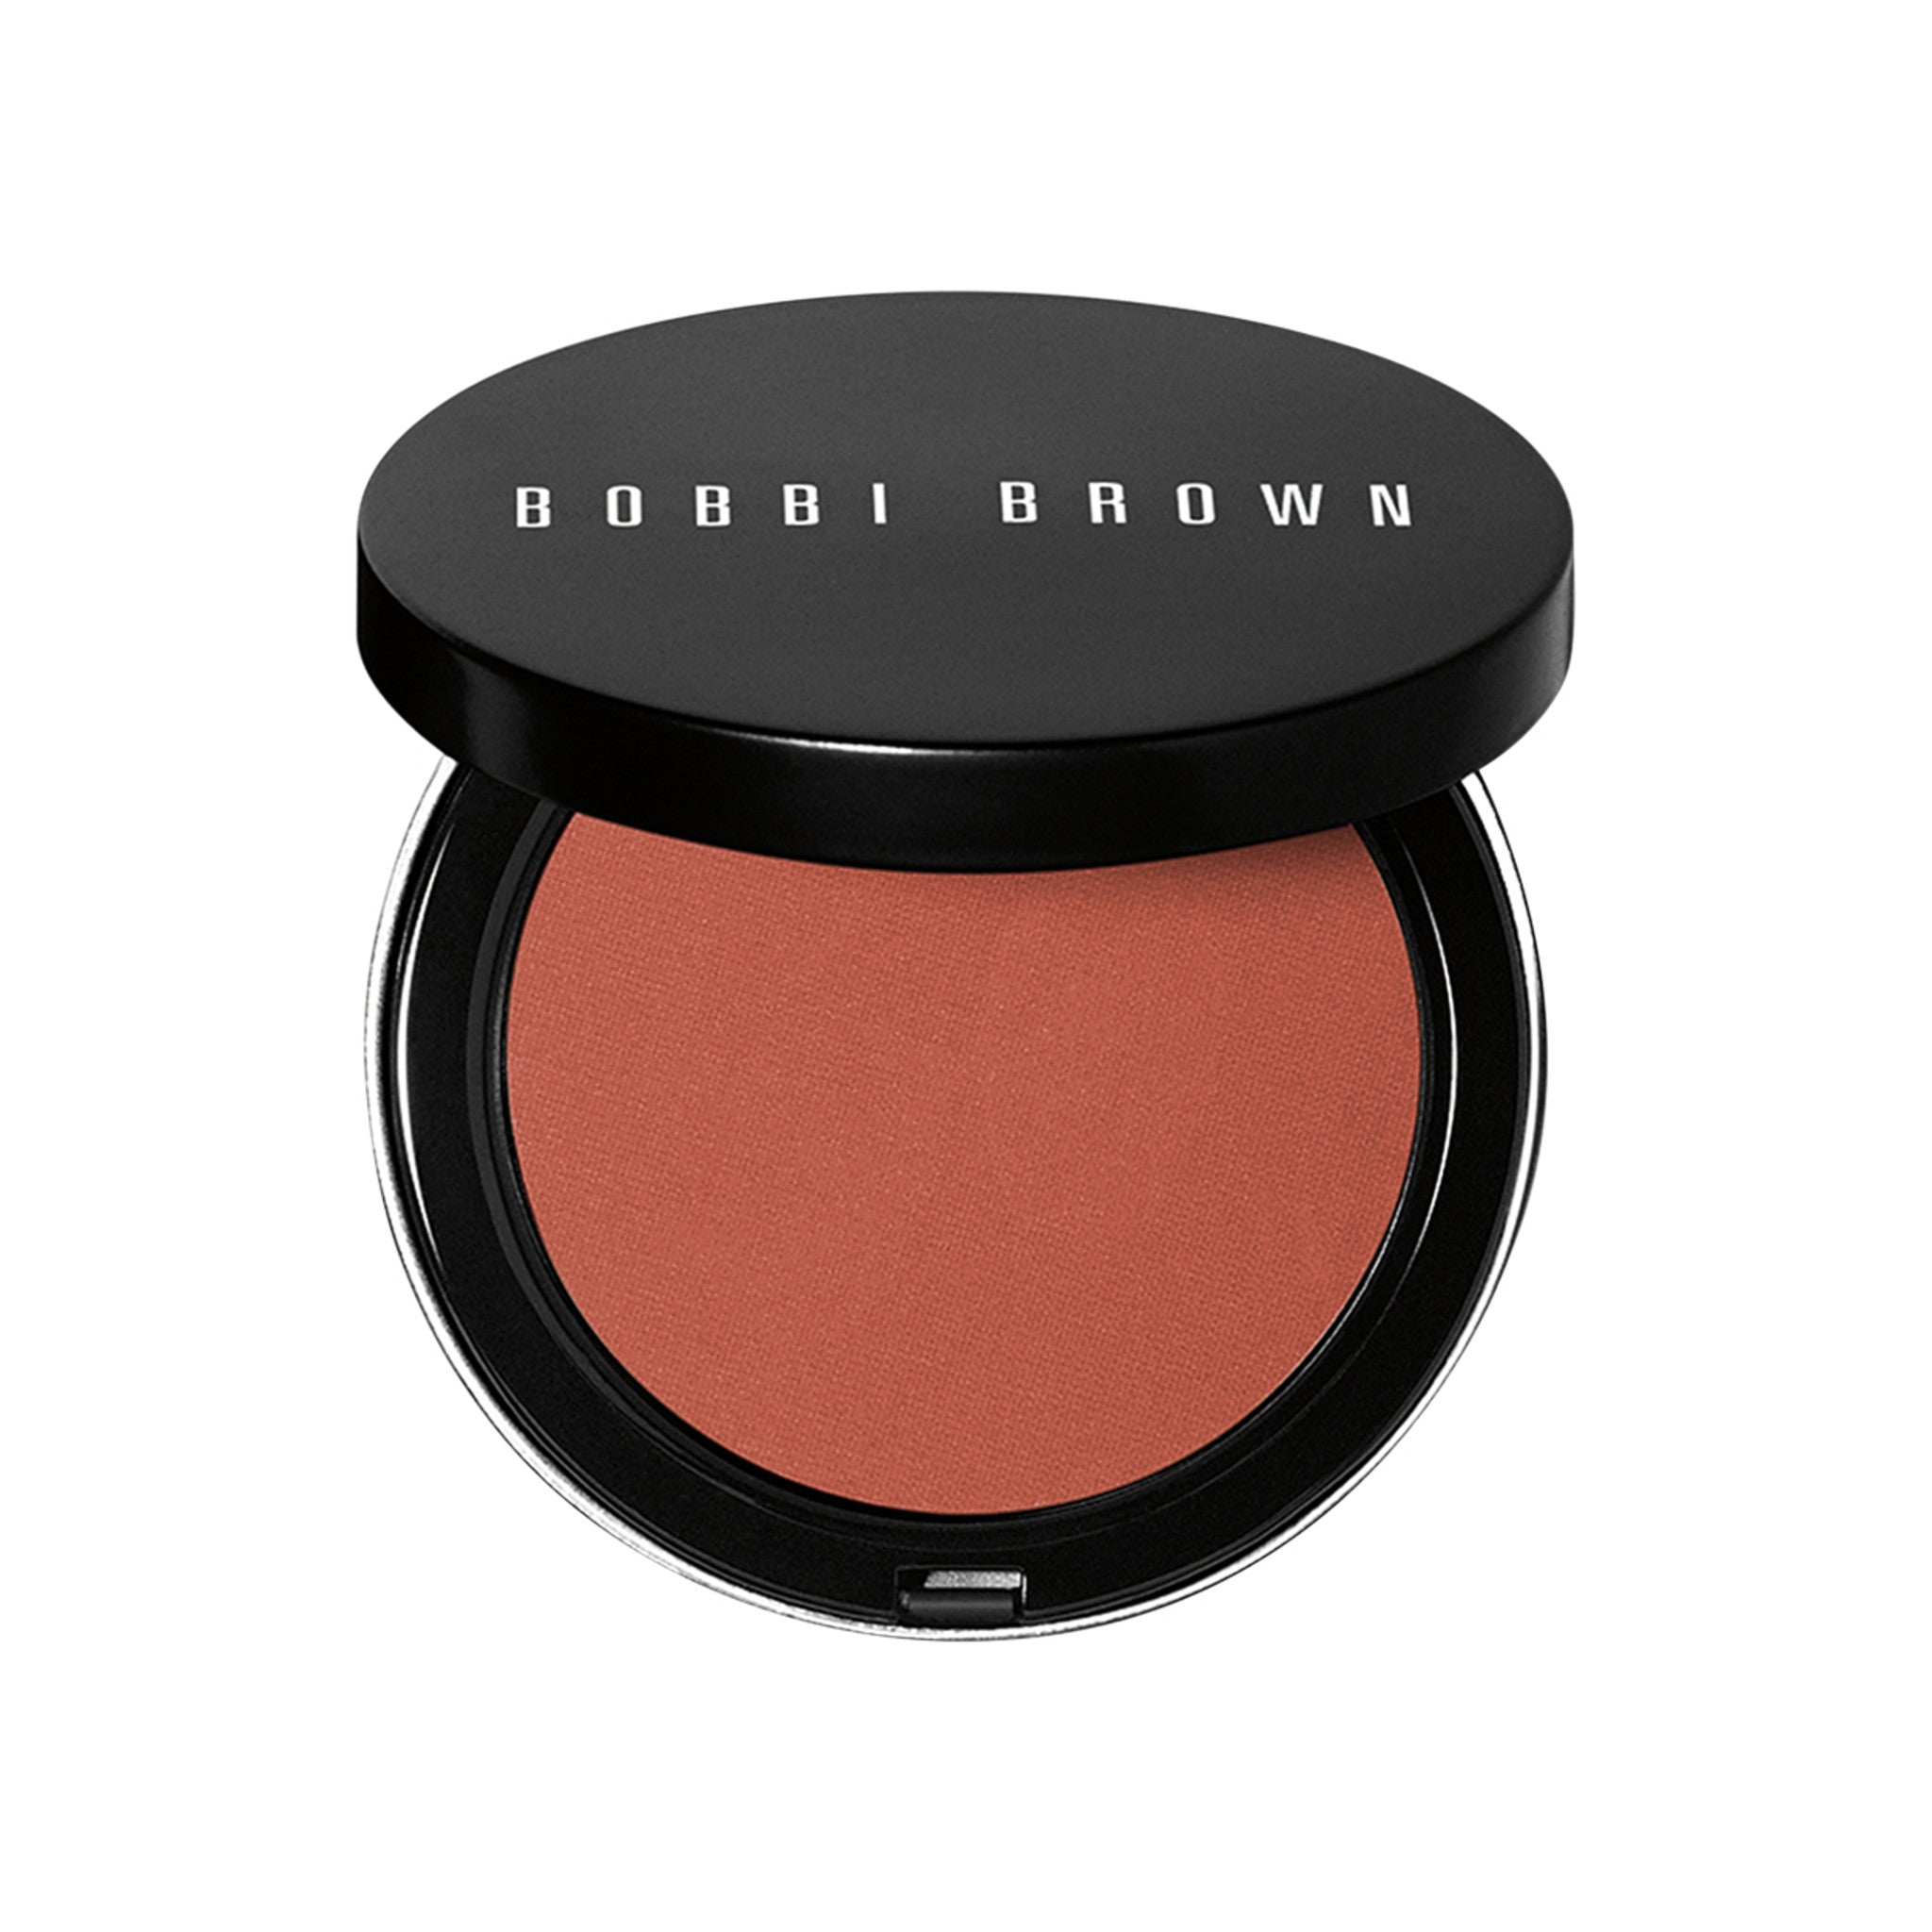 Bobbi Brown Bronzing Powder Color/Shade variant: Dark main image. This product is in the color red, for all complexions